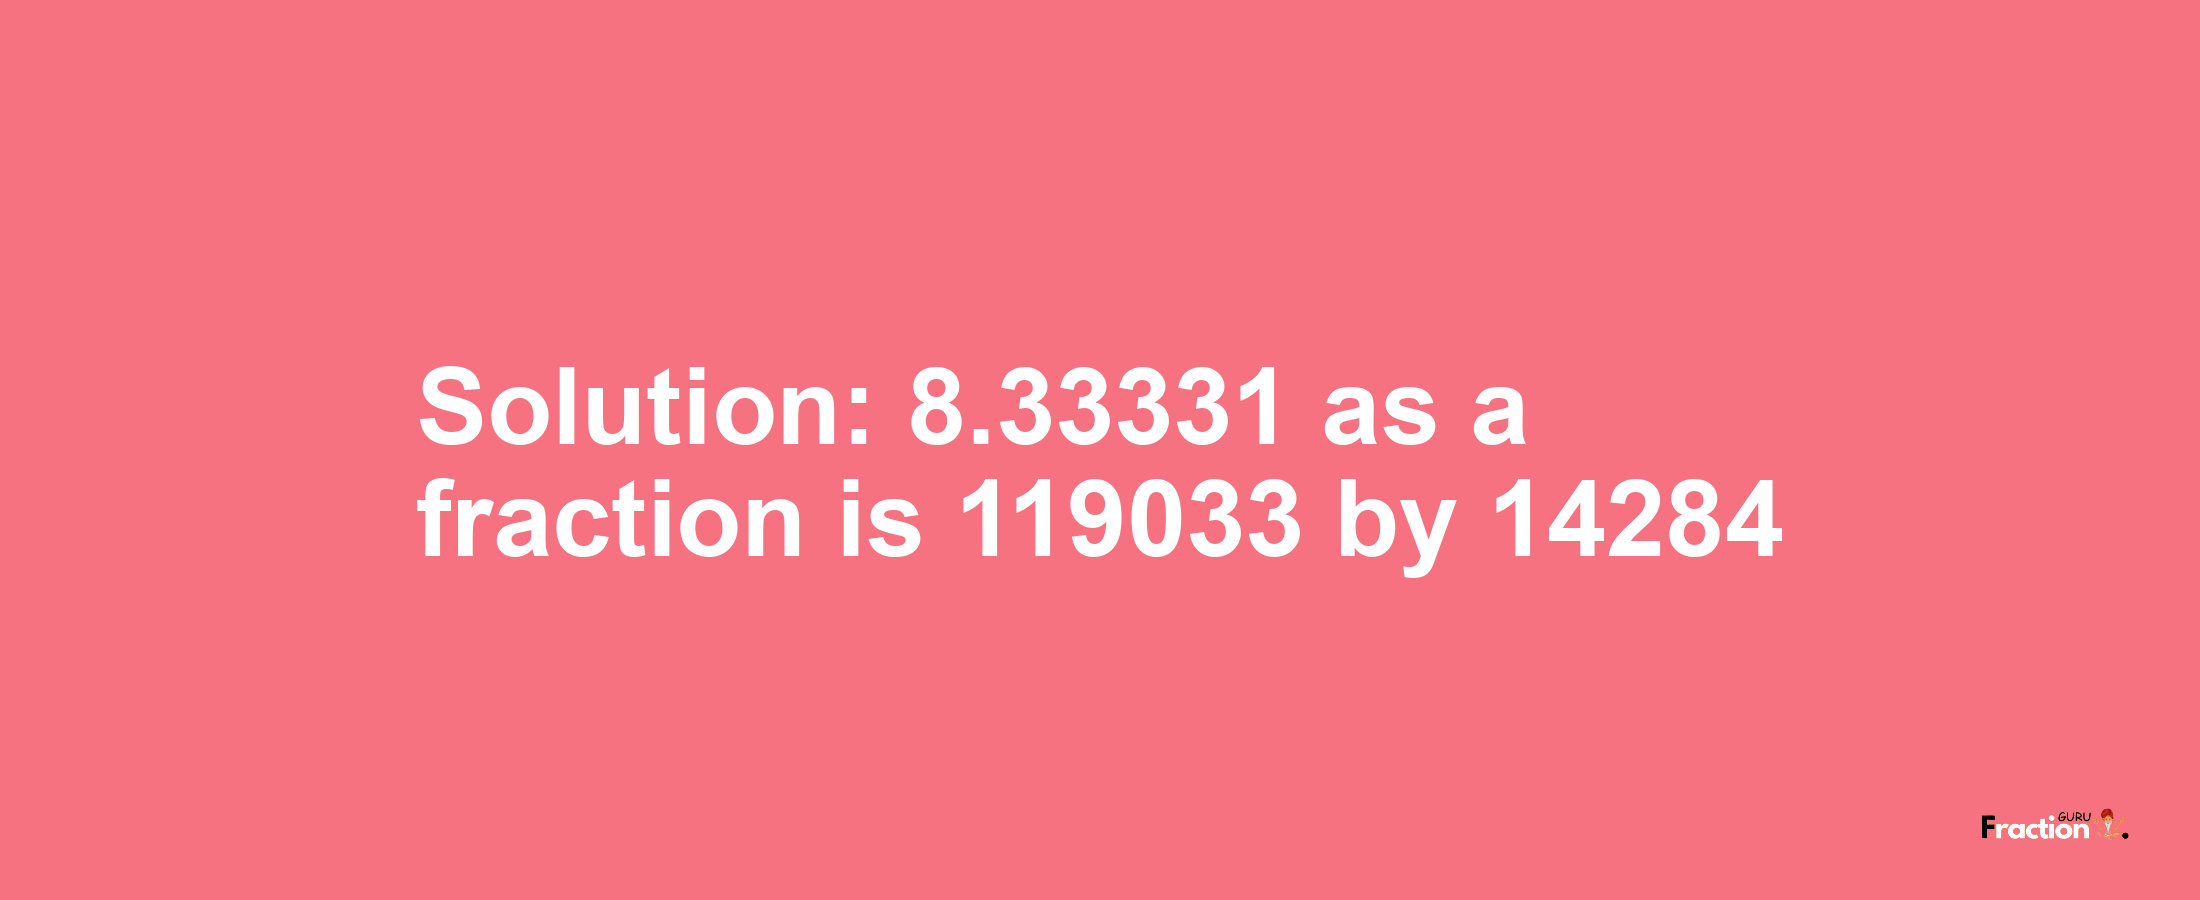 Solution:8.33331 as a fraction is 119033/14284